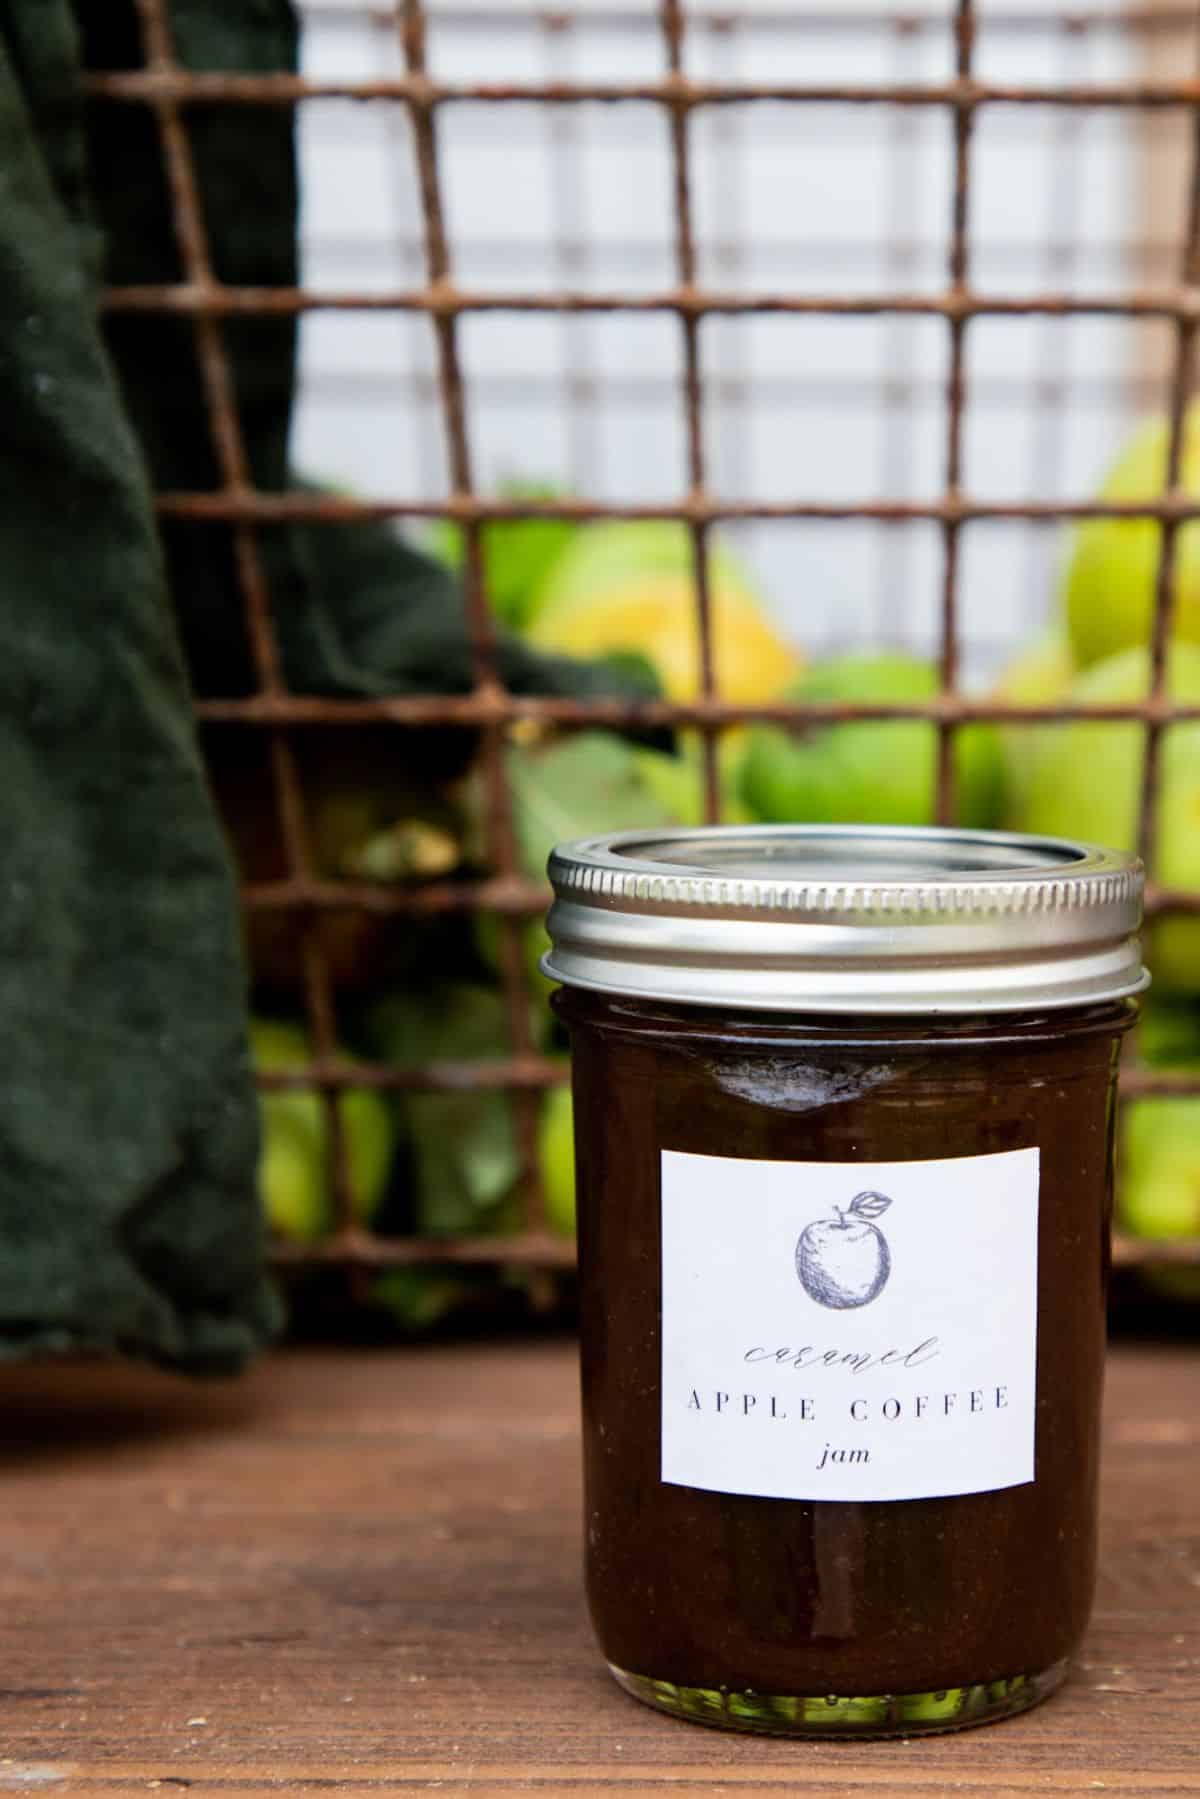 Delicious caramel apple coffee jam canned in a glass jar.